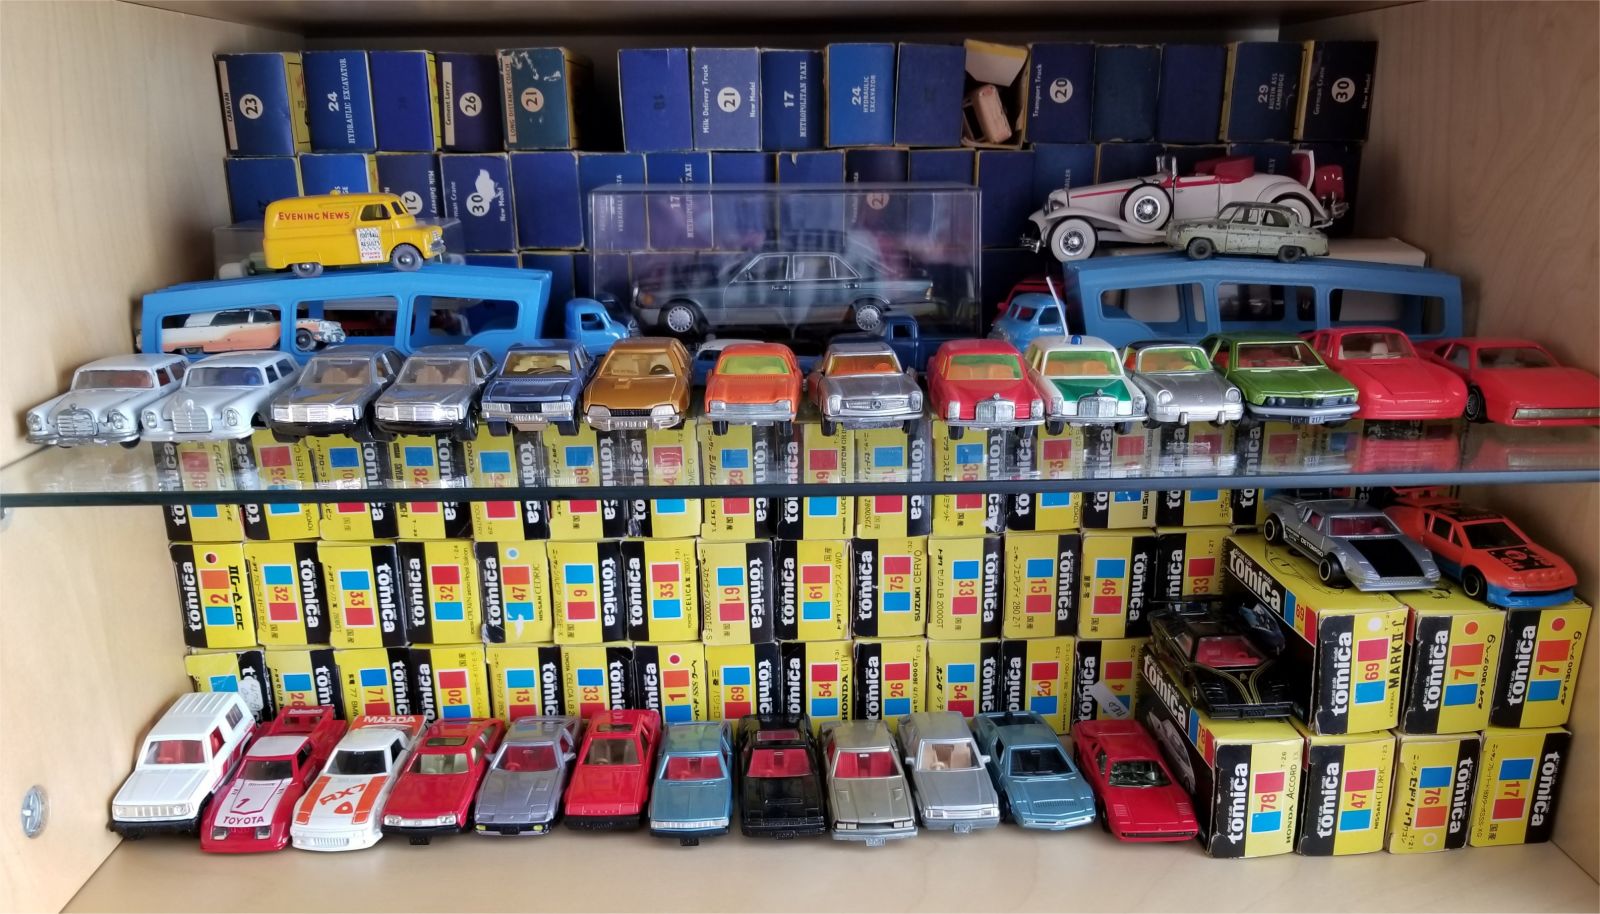 Tomica is especially crowded with more layers of boxes behind what is seen here